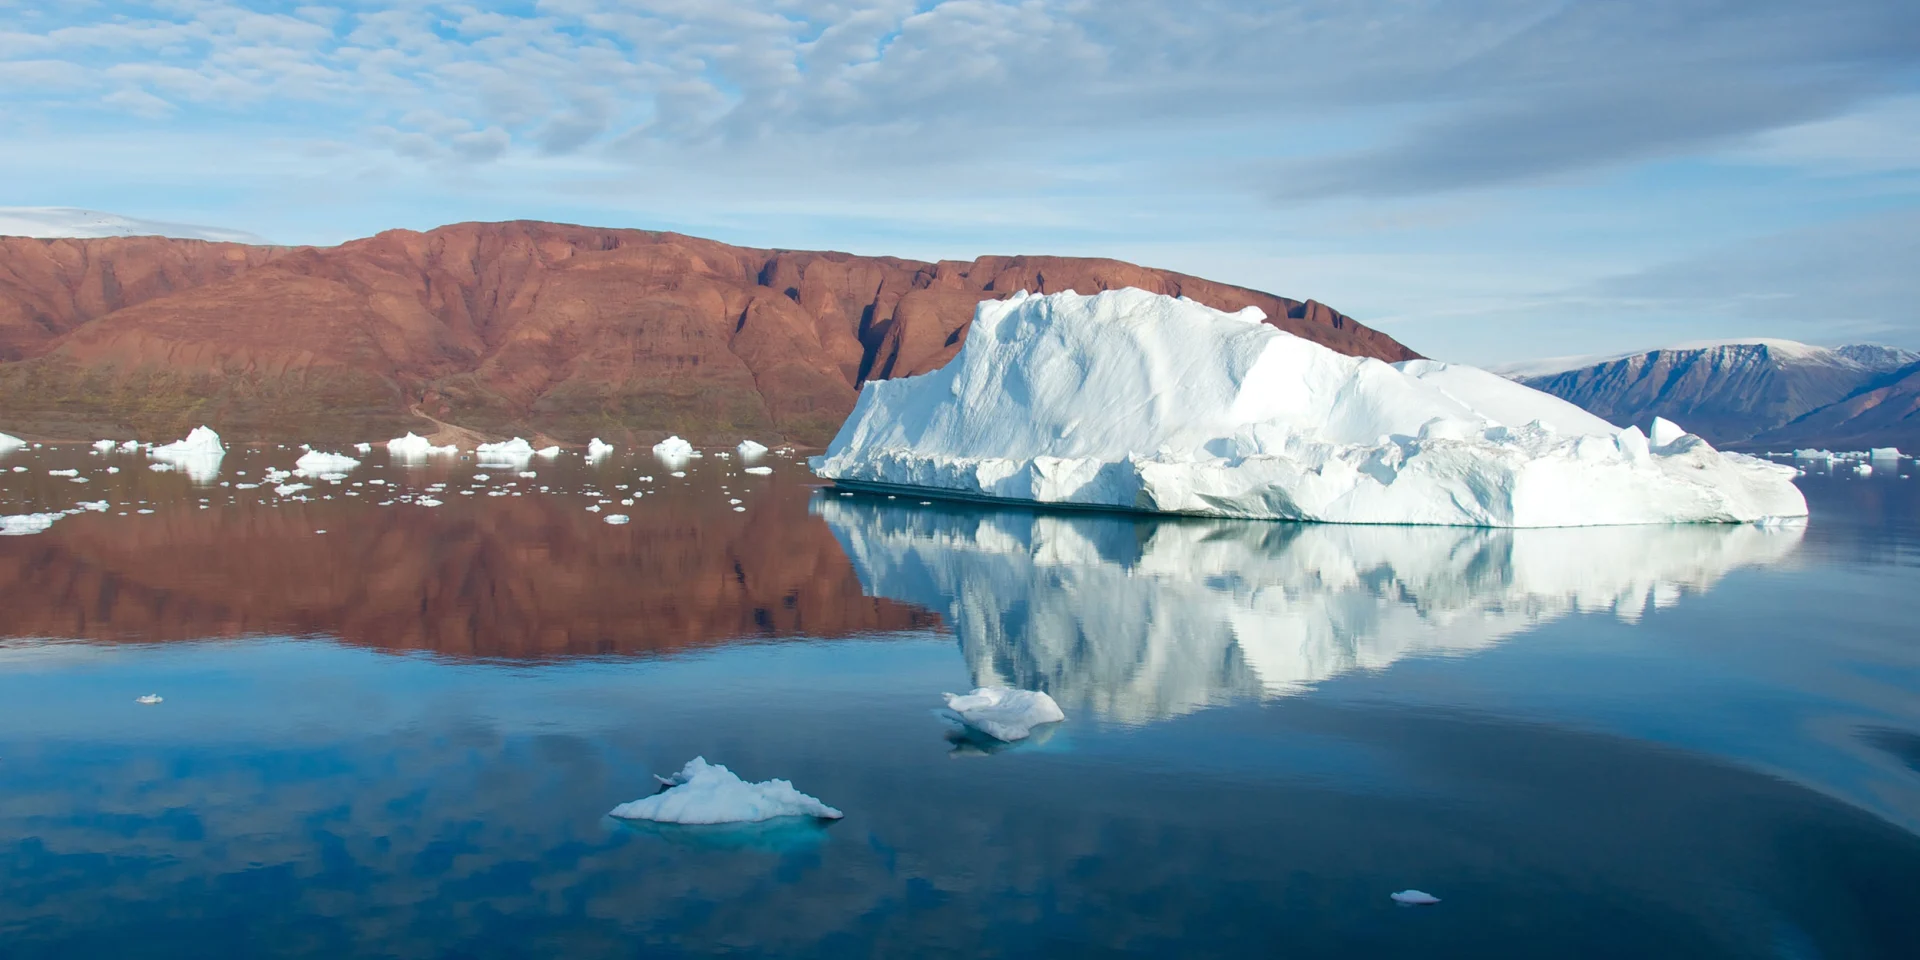 Greenland – The Ultimate Fjord Expedition